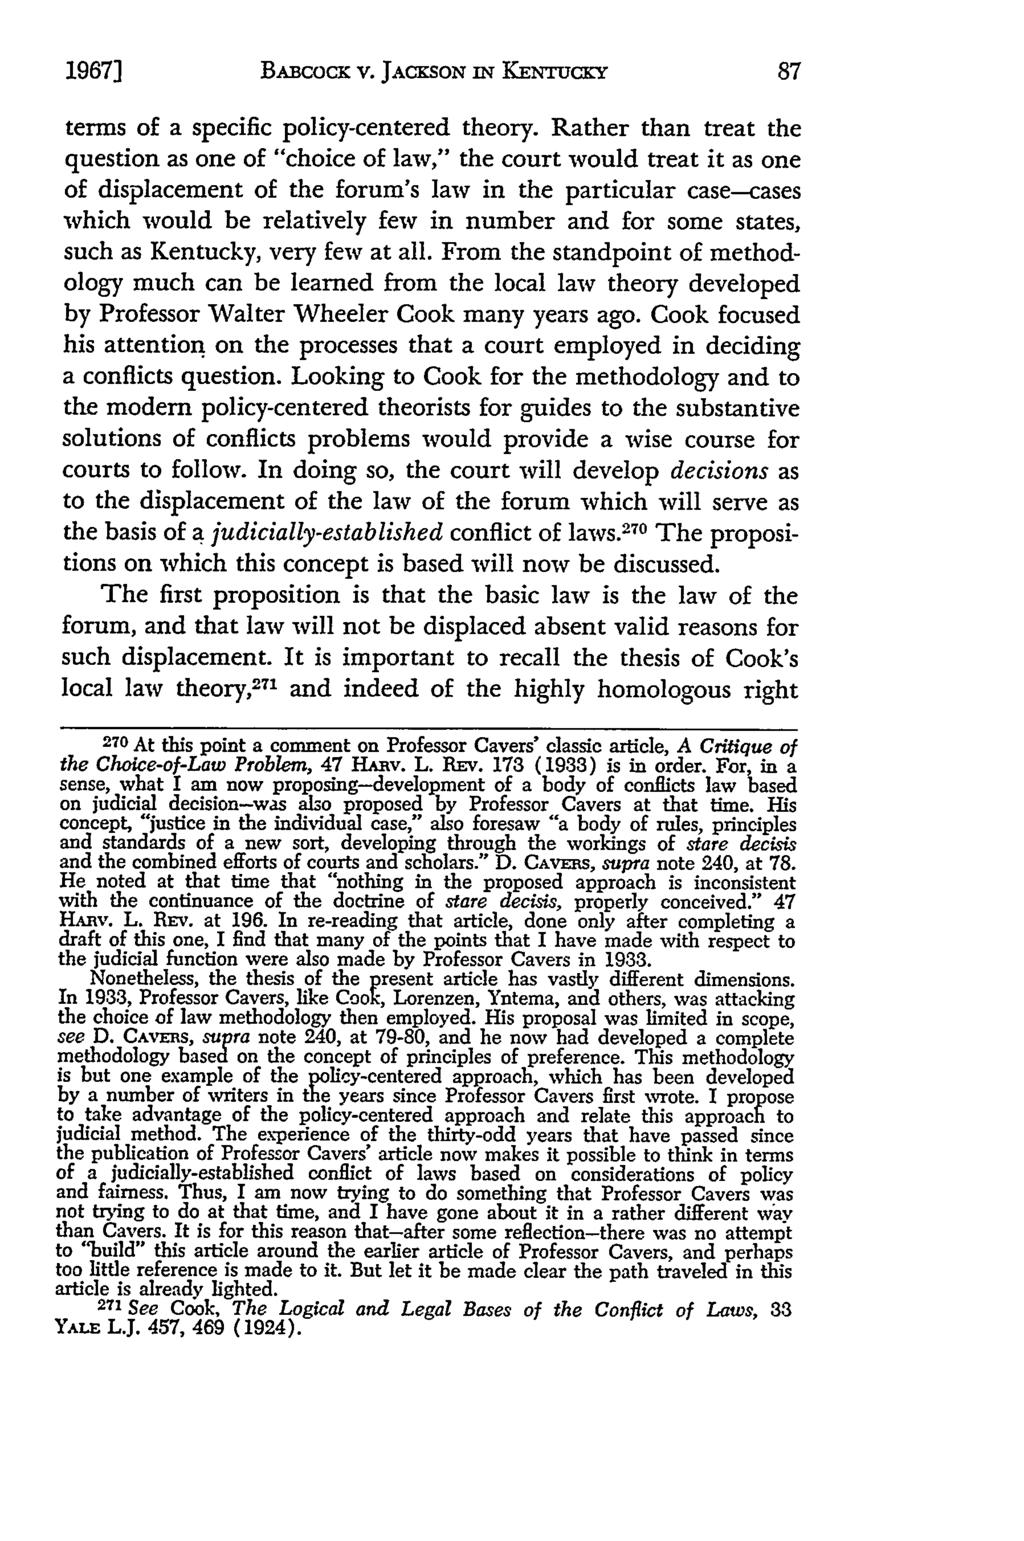 19671 BABCOCK v. JACKSON IN KENTUCKy terms of a specific policy-centered theory.